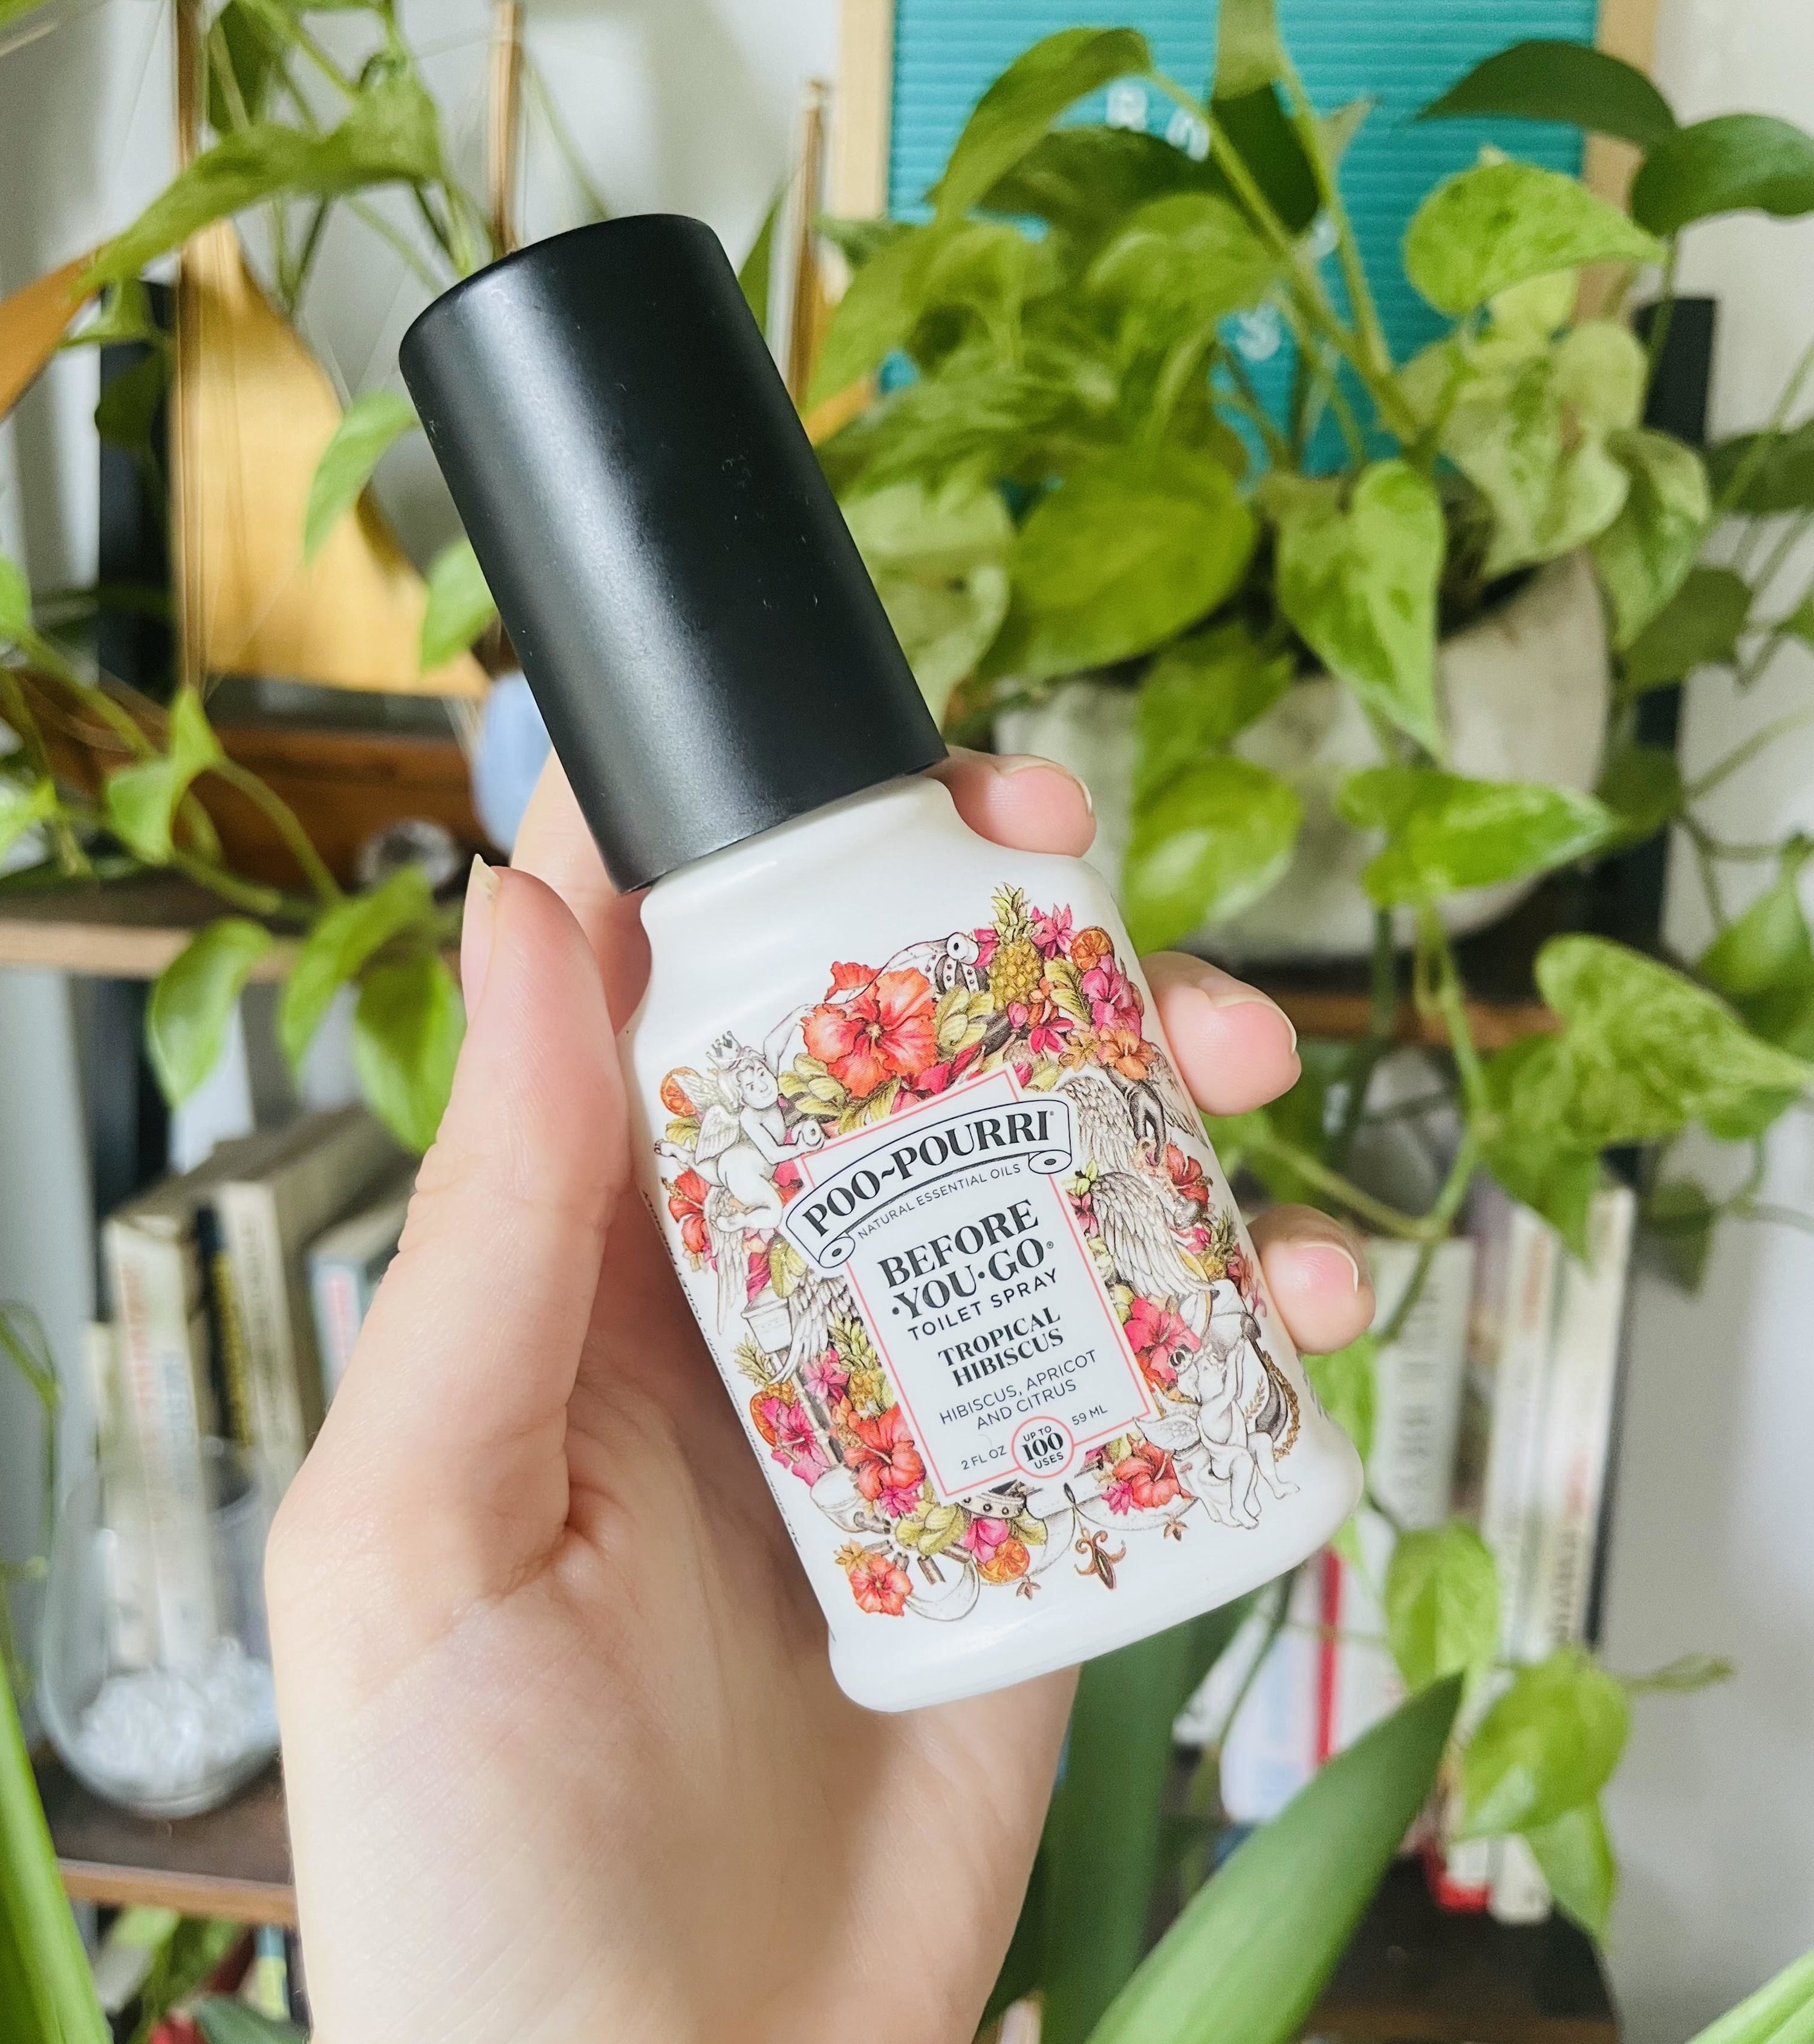 A person holding the bottle of Poo-Pourri spray